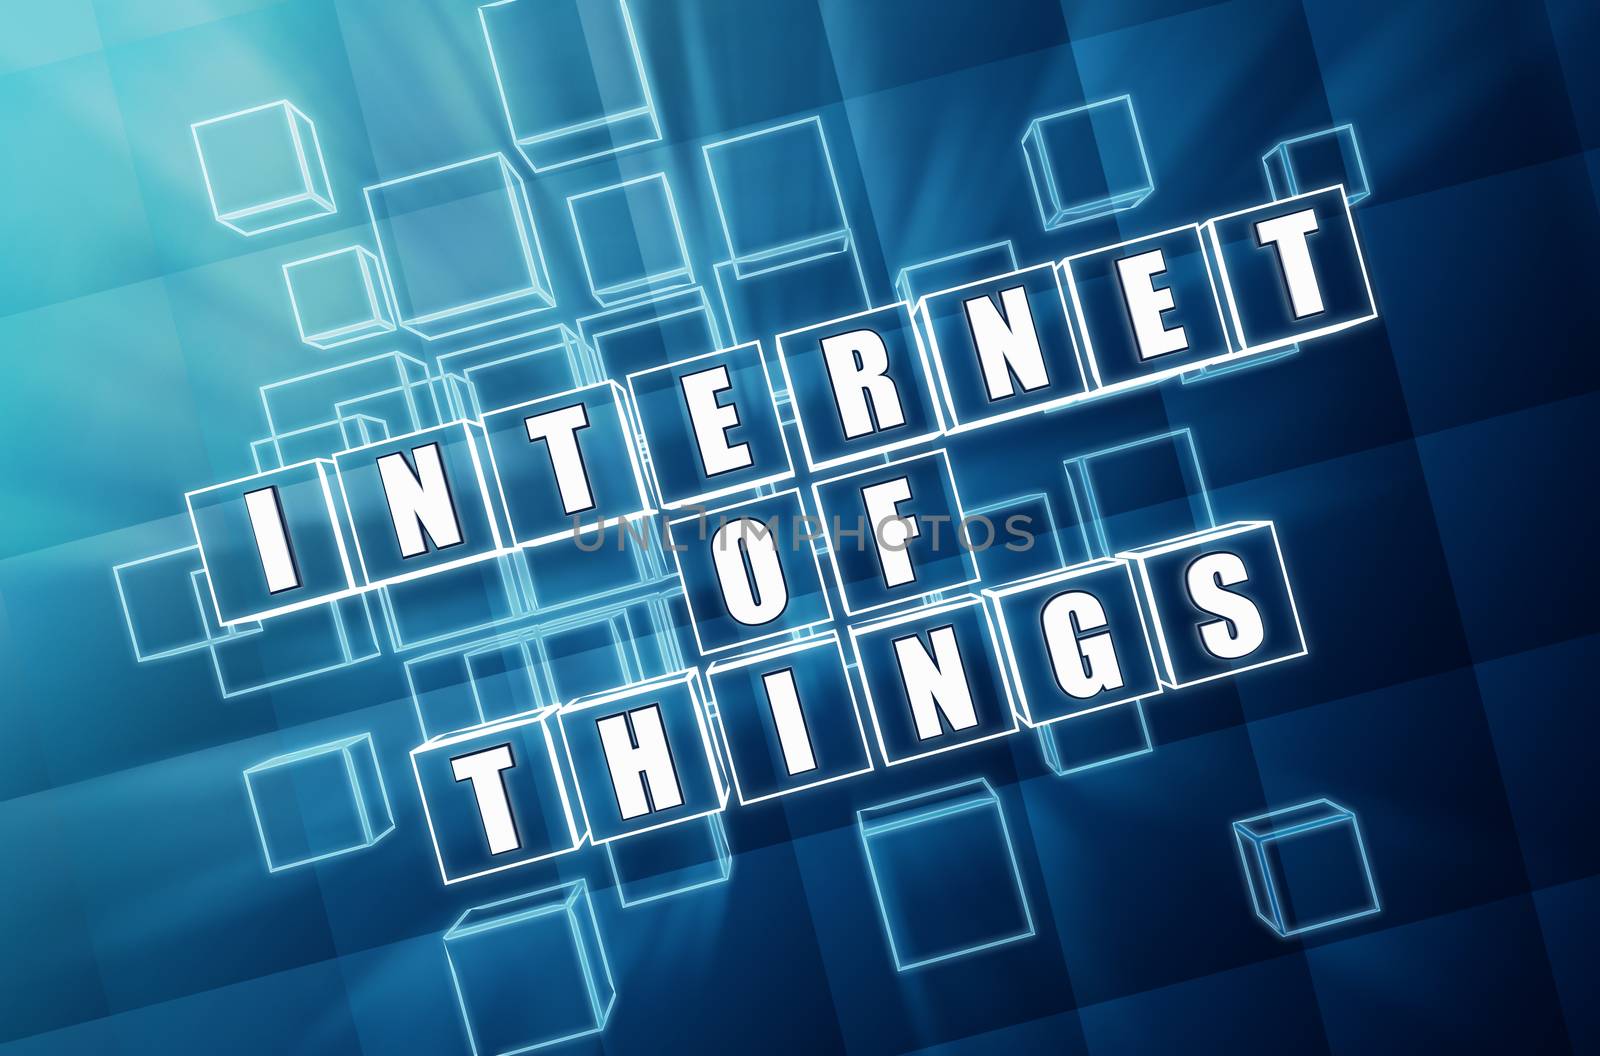 internet of things, remote control in network - text in 3d blue glass cubes with white letters, high technologies concept